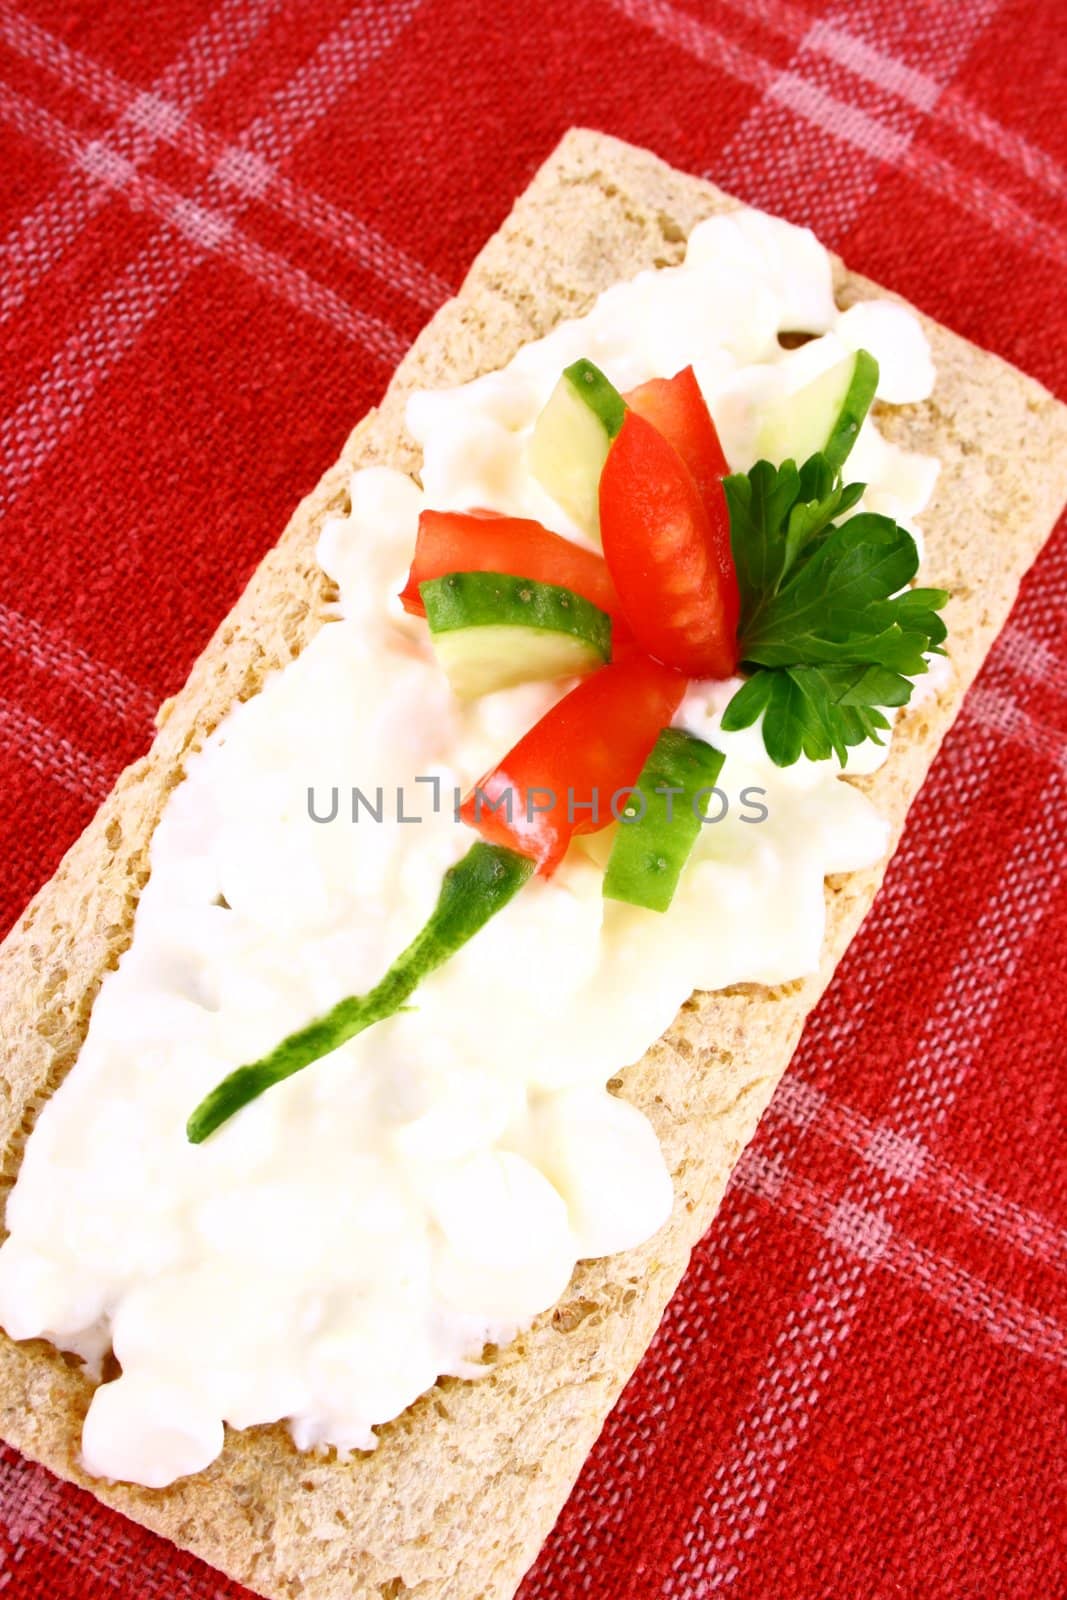 A healthy sandwich with tomato green and red vegetables